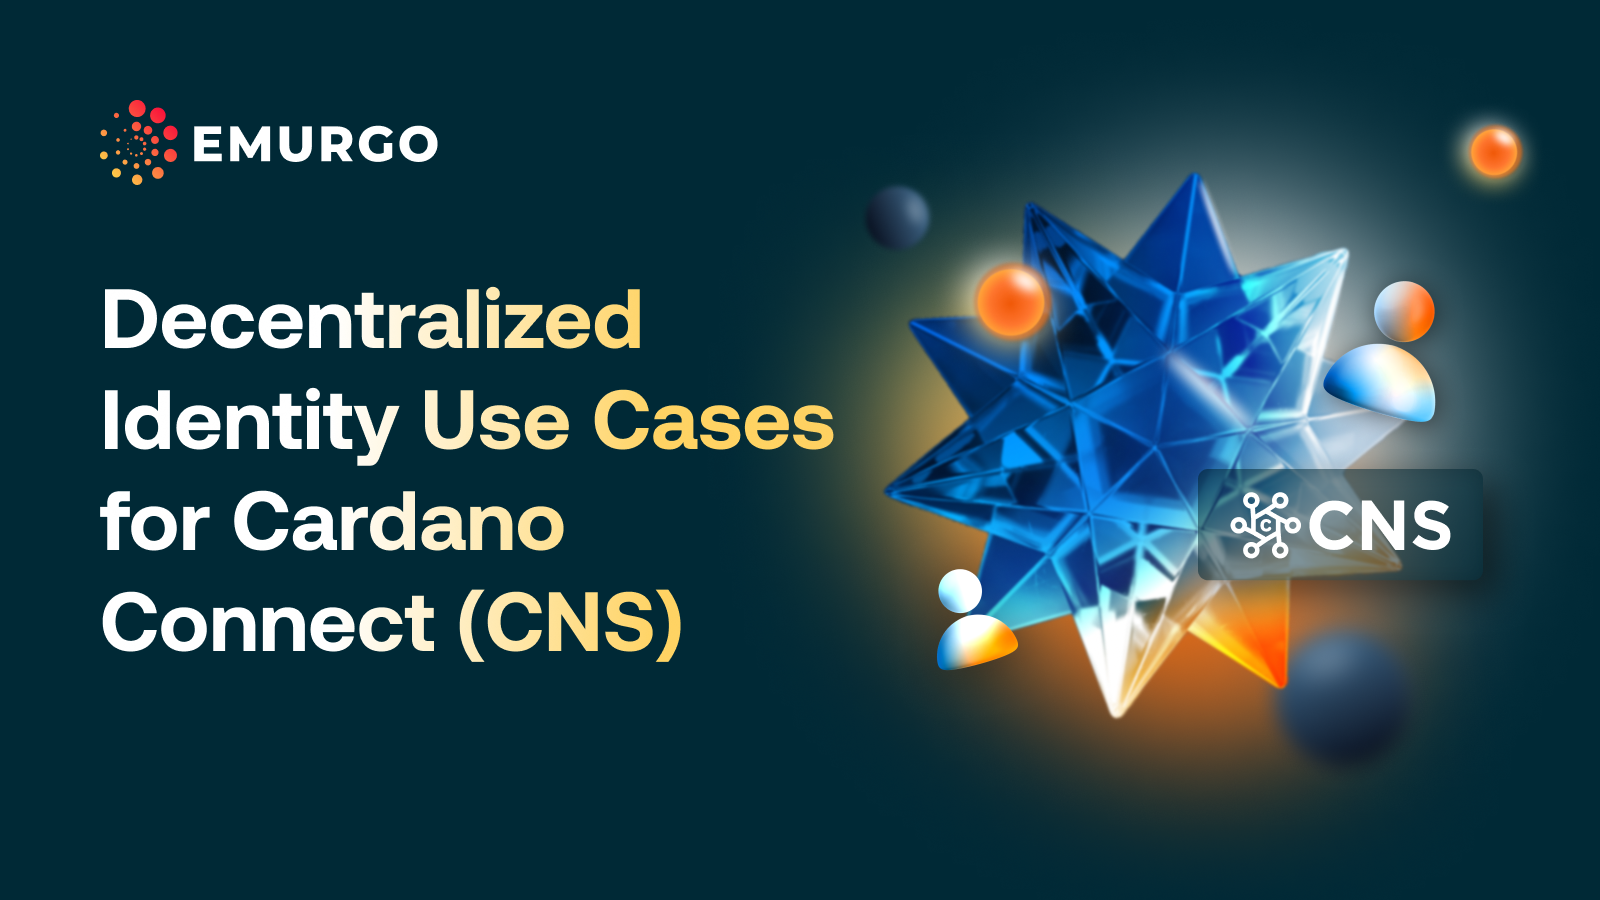 AB Decentralized Identity Use Cases For Cardano Connect (CNS)